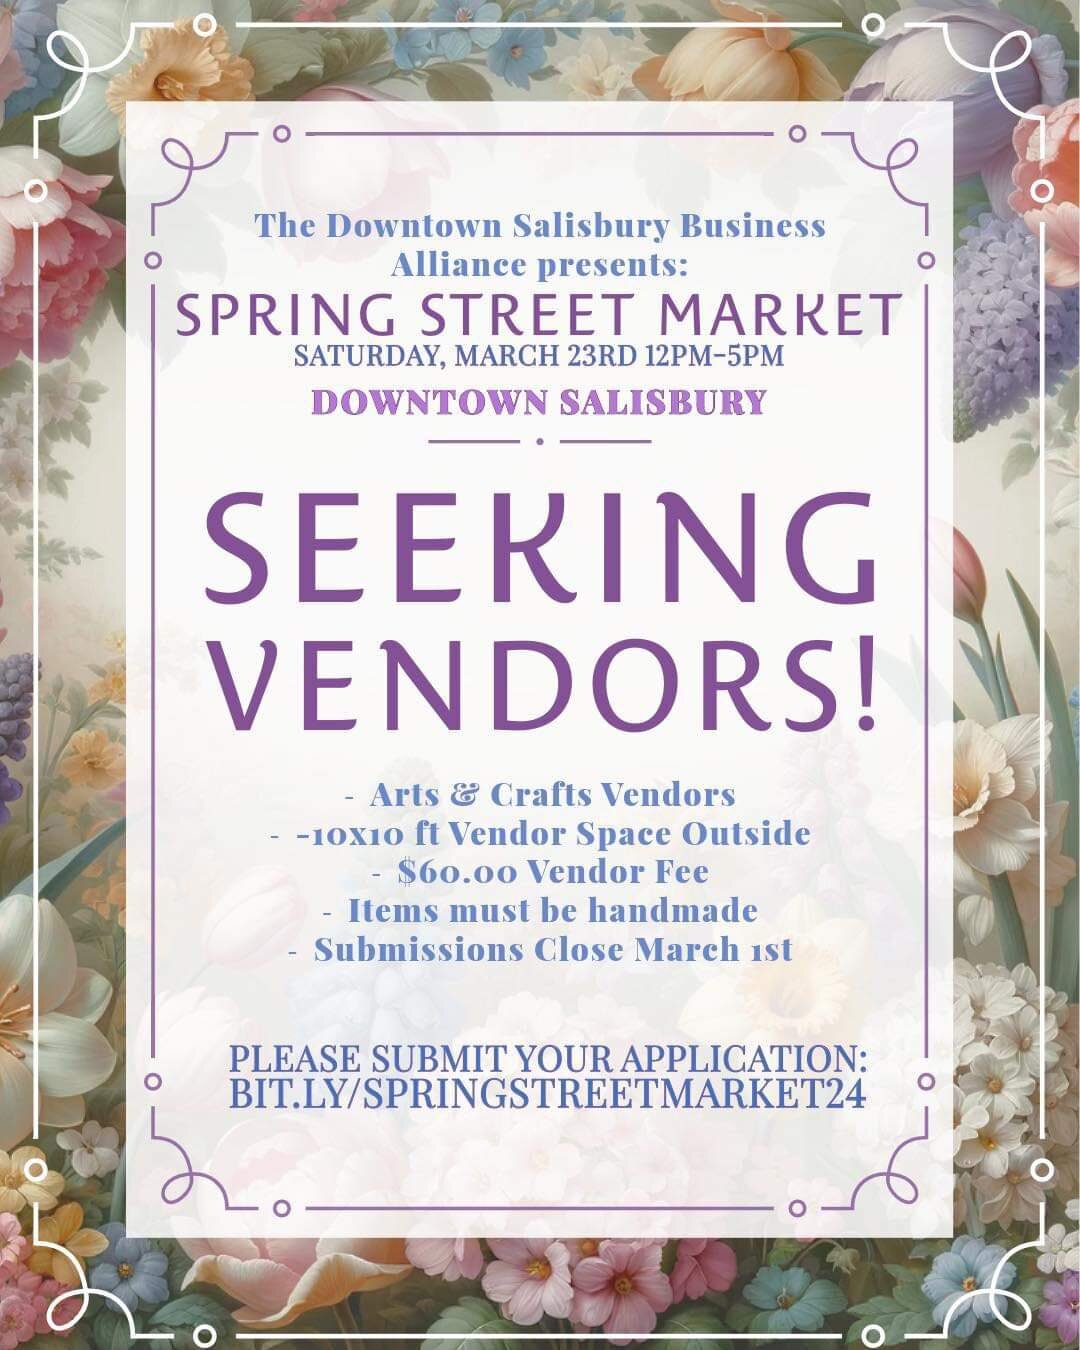 Interested in being a vendor? Apply now! We&rsquo;re expecting vendor spots to sell out!